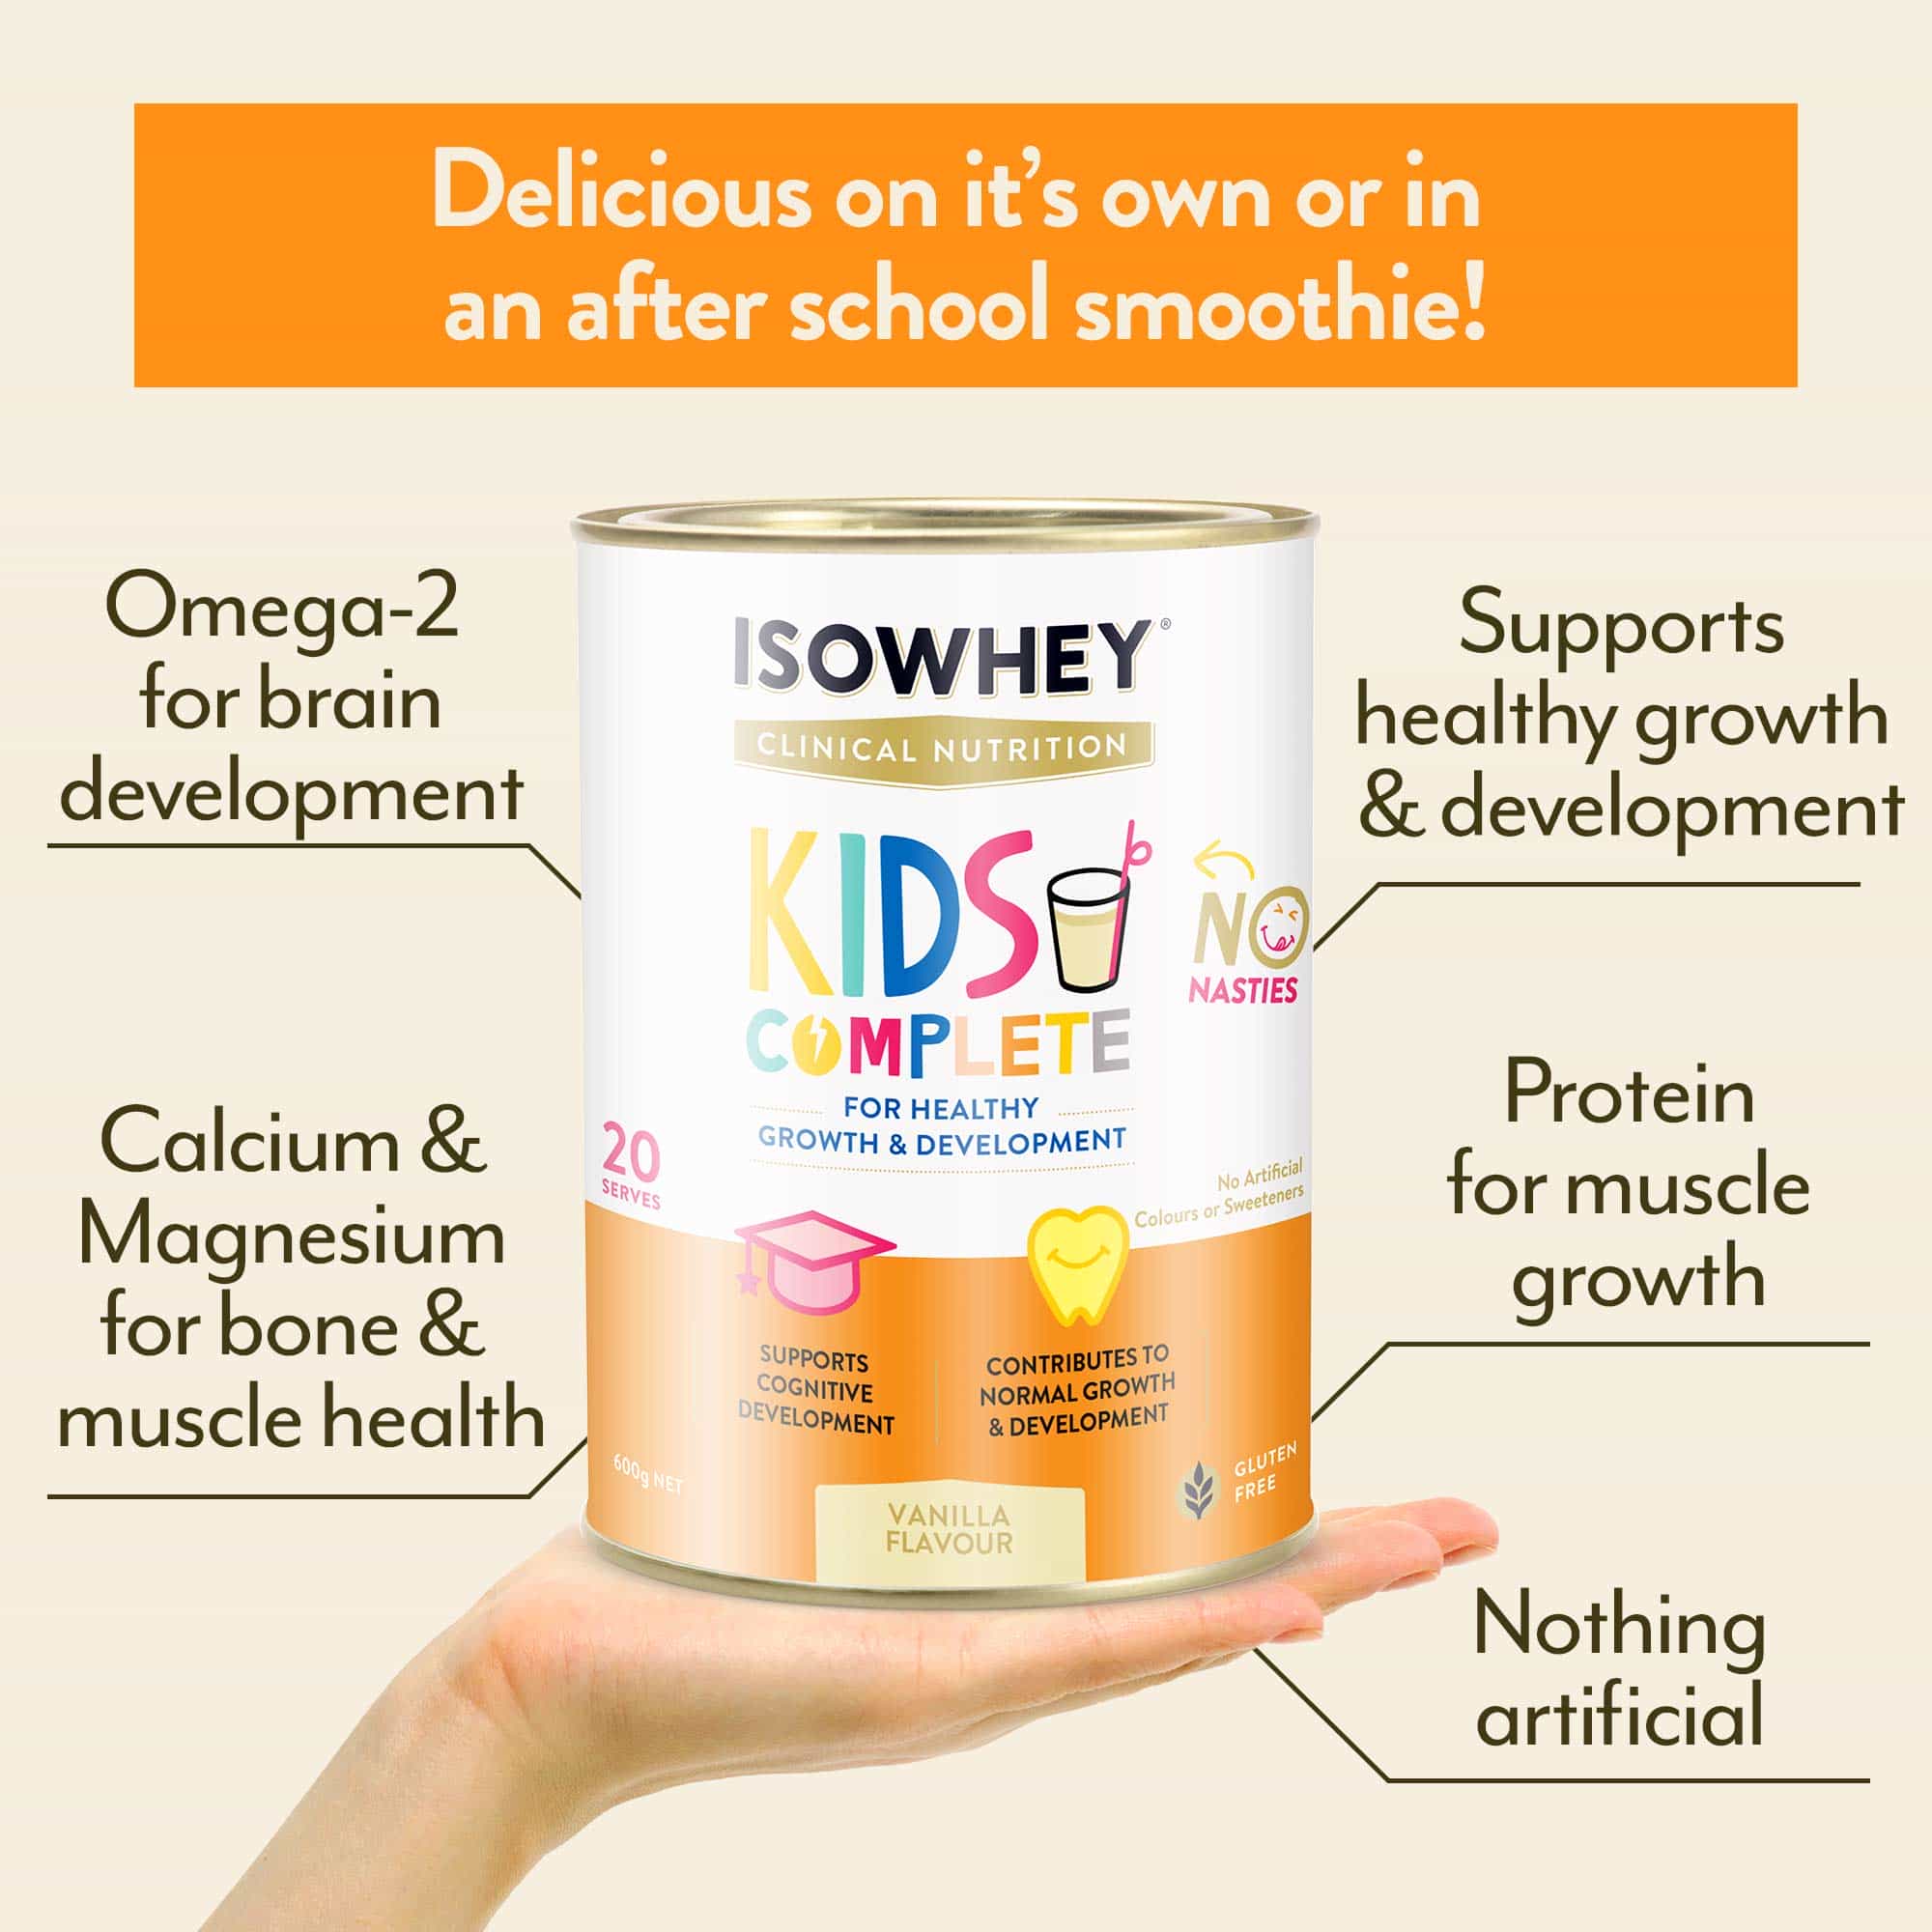 IsoWhey Clinical Nutrition Kids Complete Vanilla 600g with text details